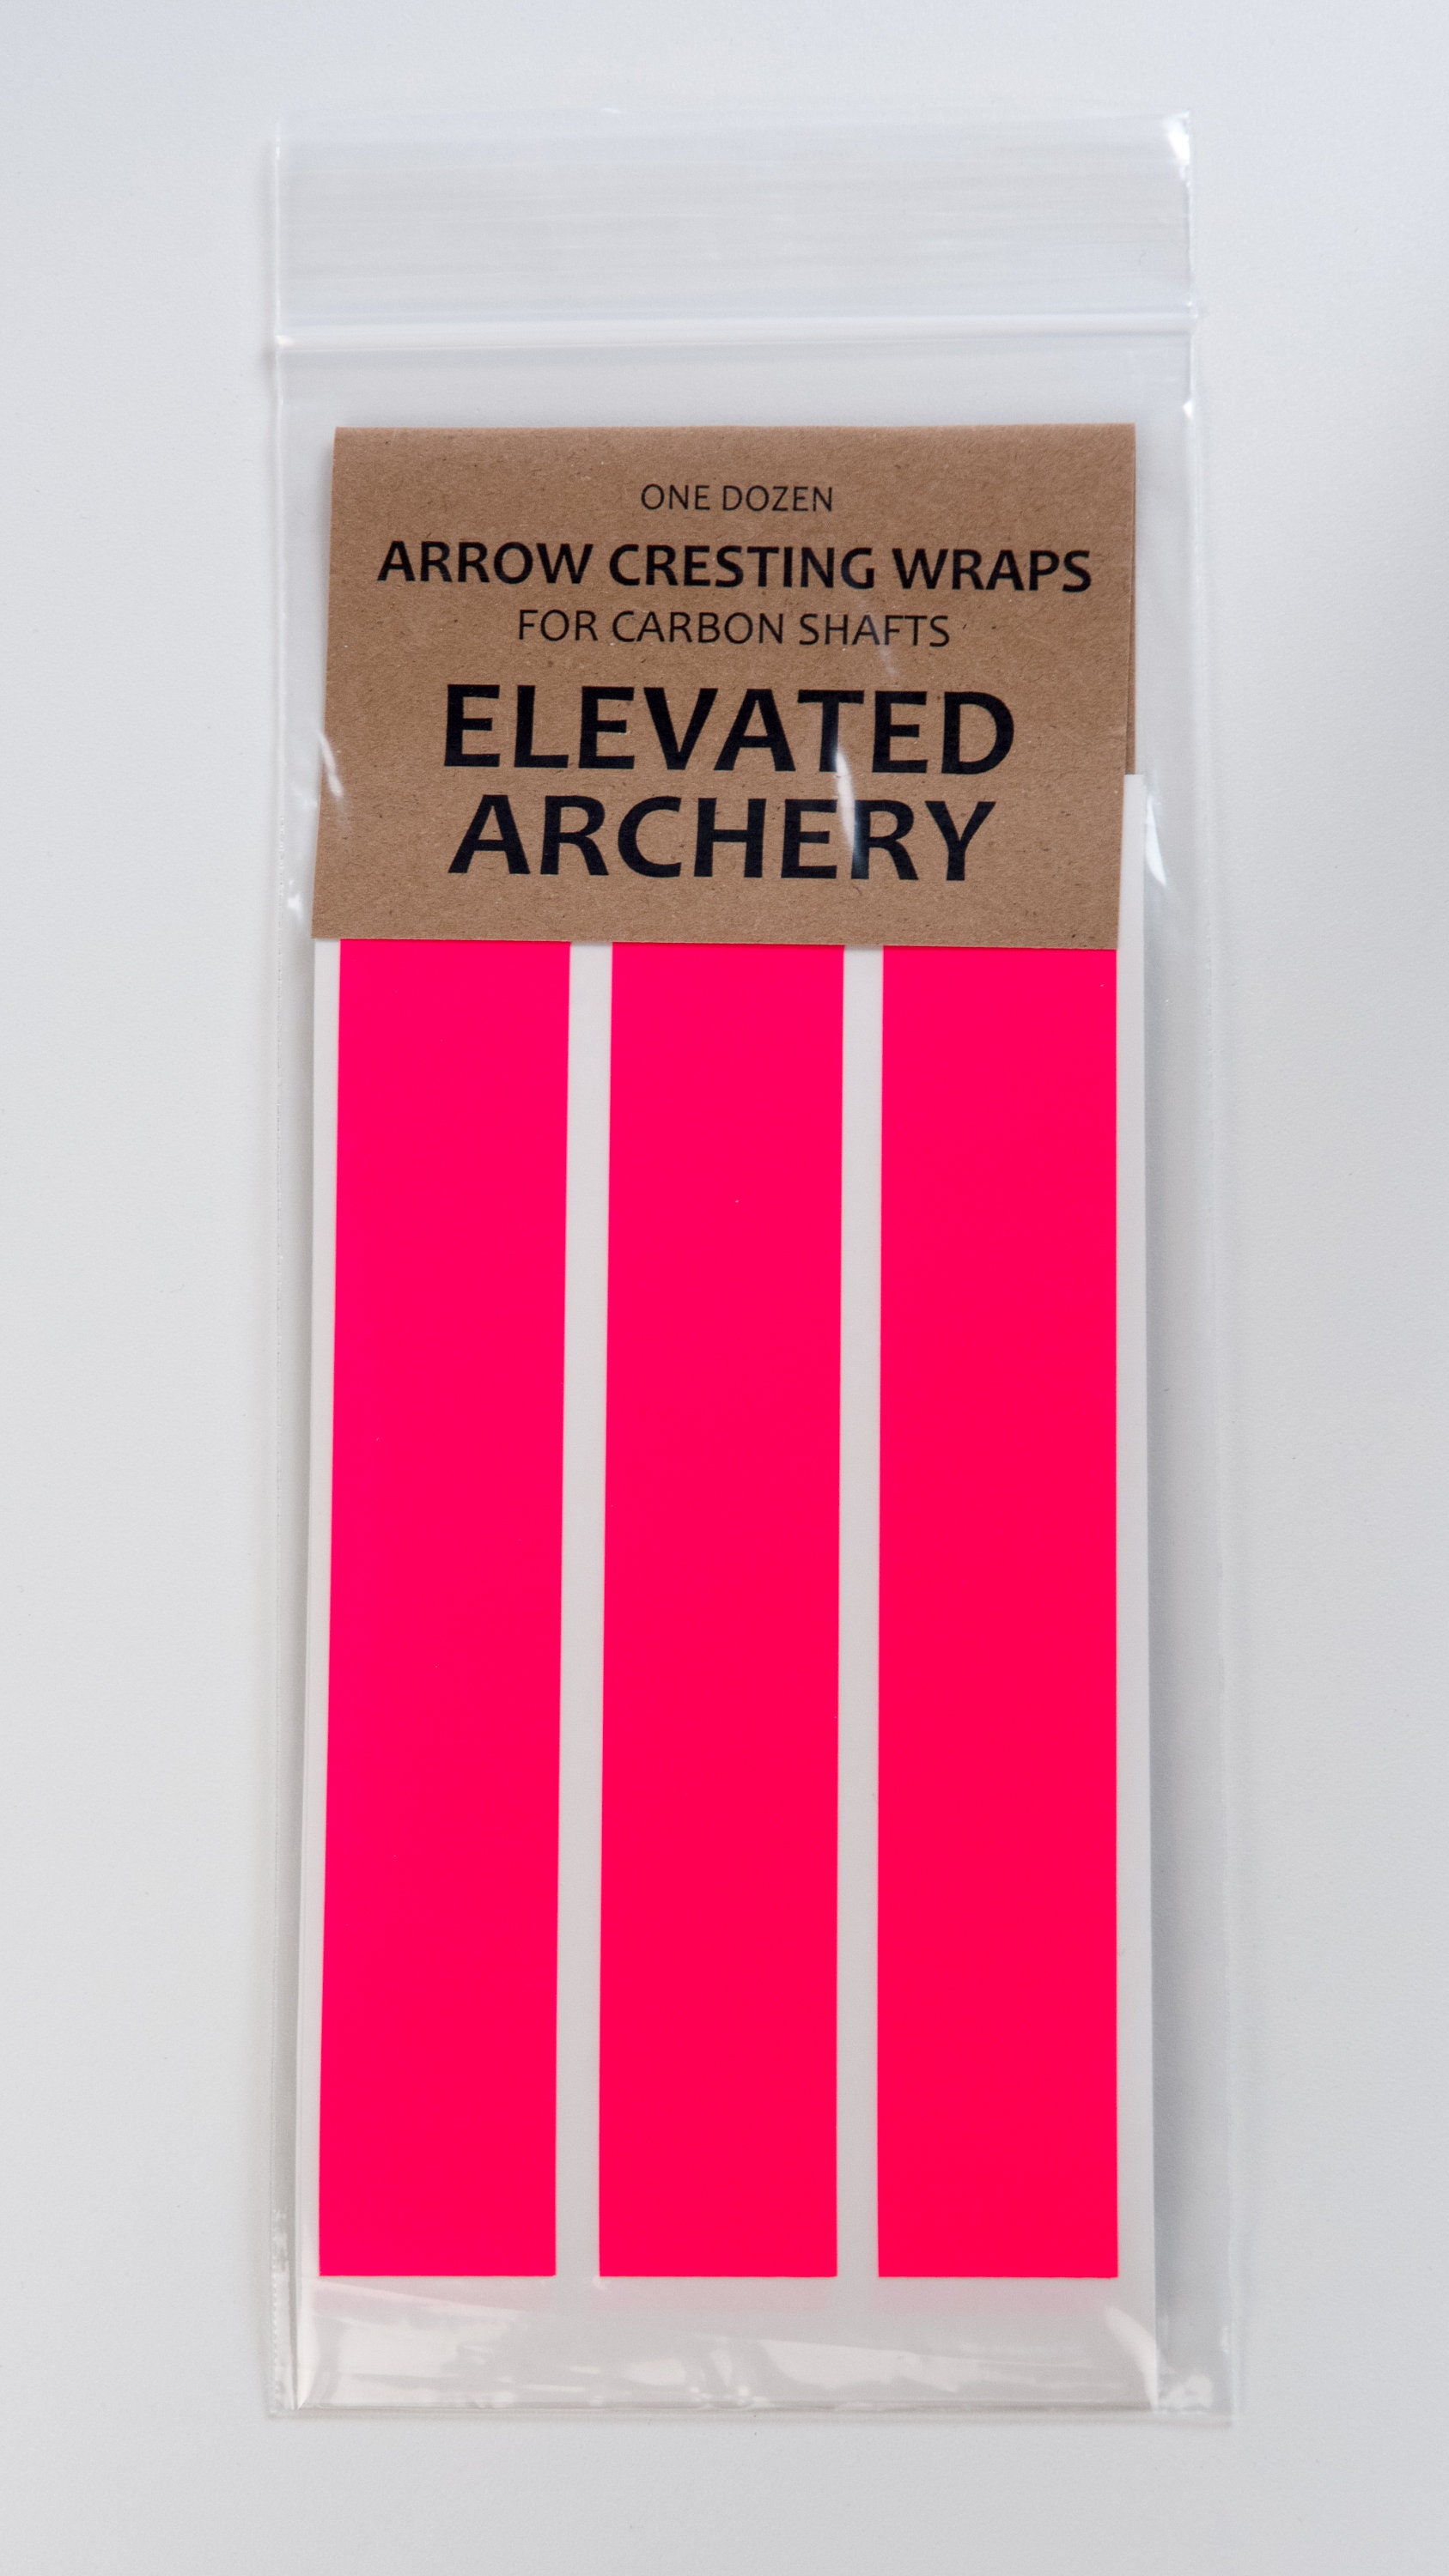 Pack of 12 Elevated Archery 4 Standard Diameter Arrow Cresting Wraps for Carbon Shafts 